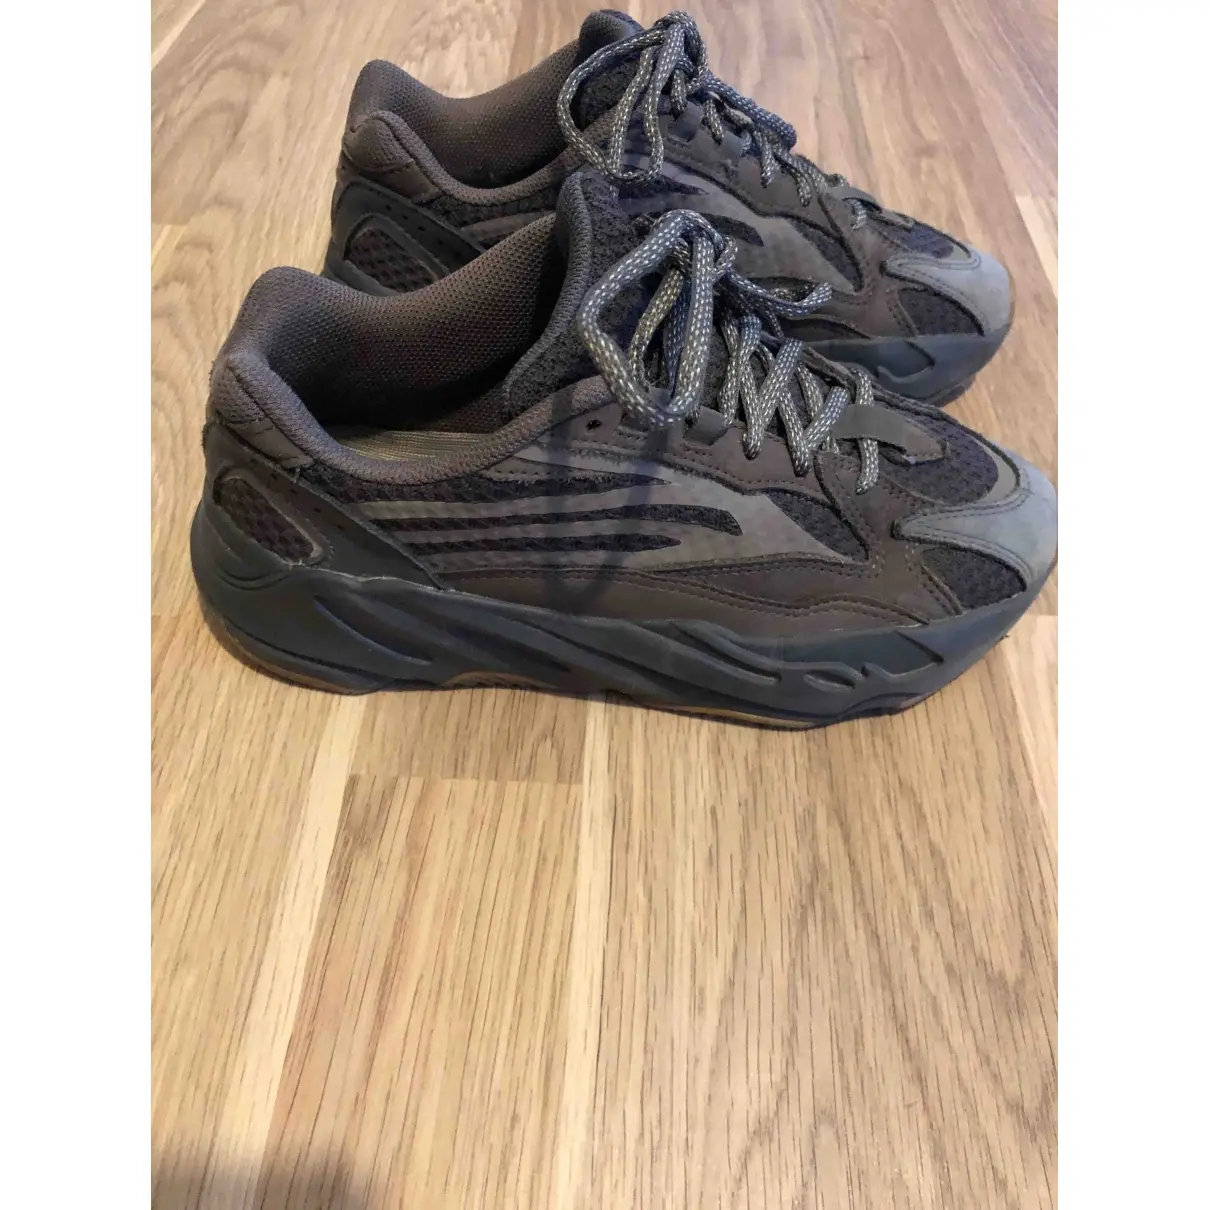 Buy Yeezy x Adidas Boost 700 V2 leather trainers online